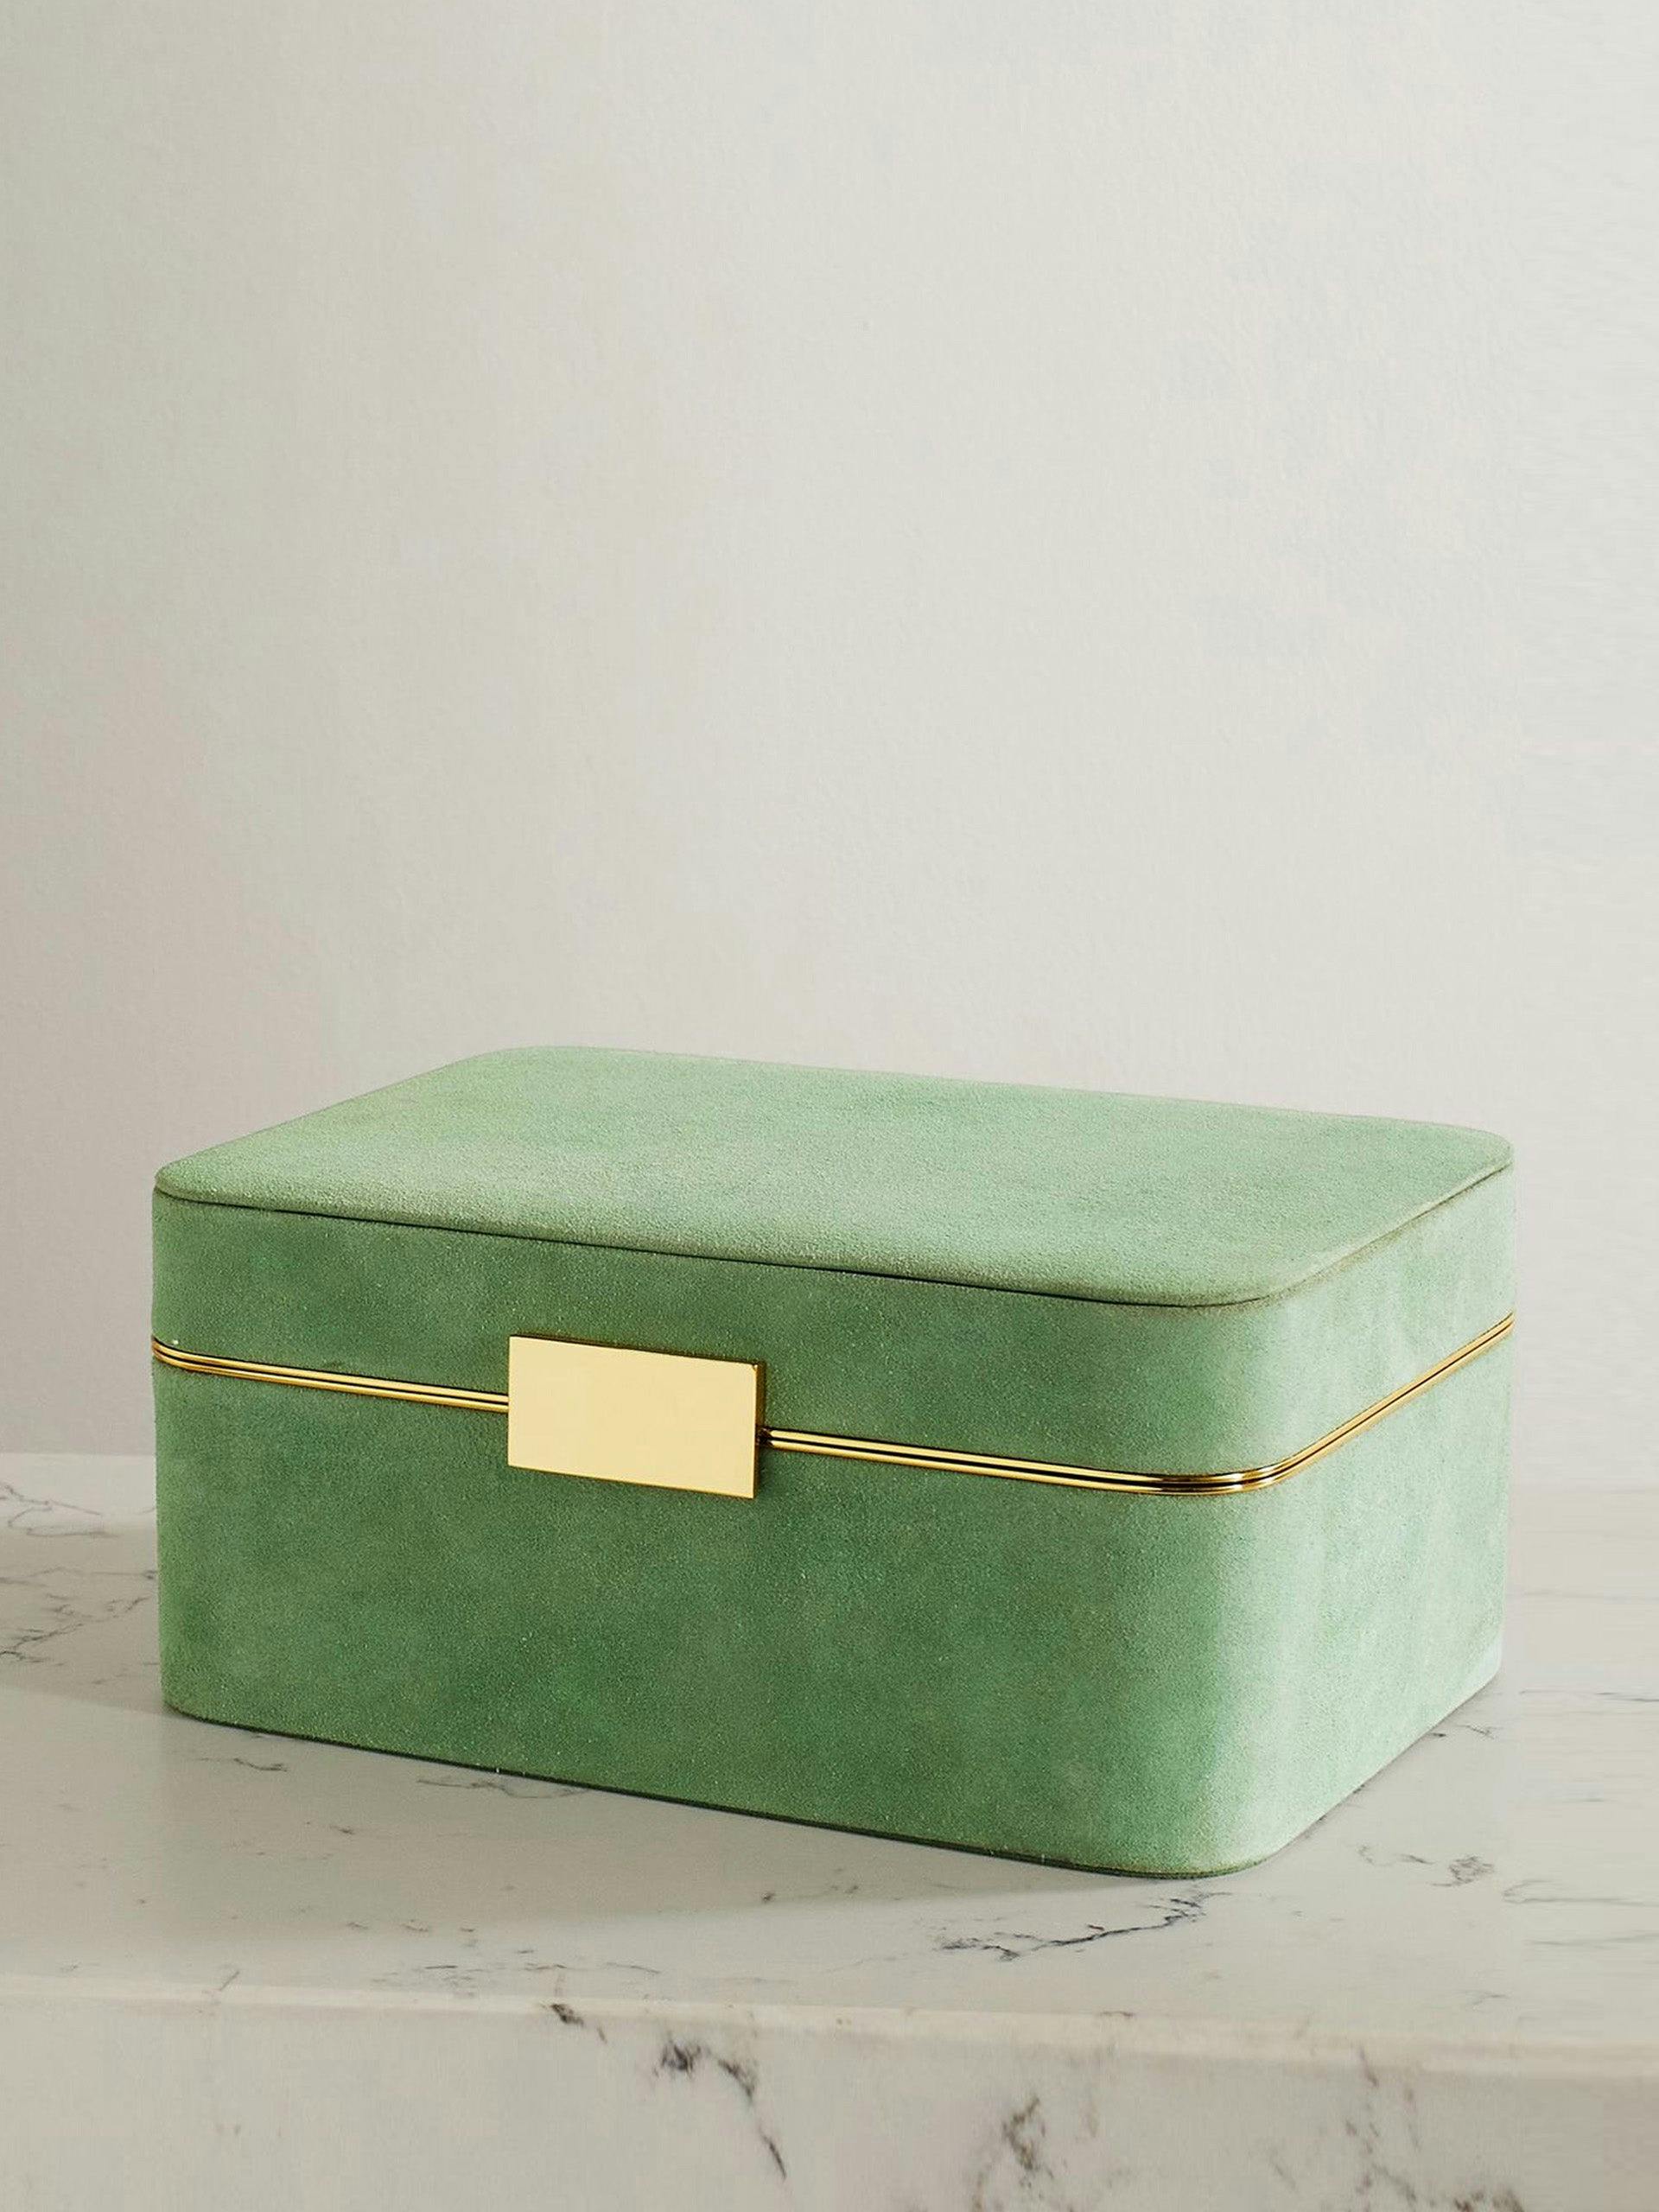 Green suede and gold-tone jewelry box